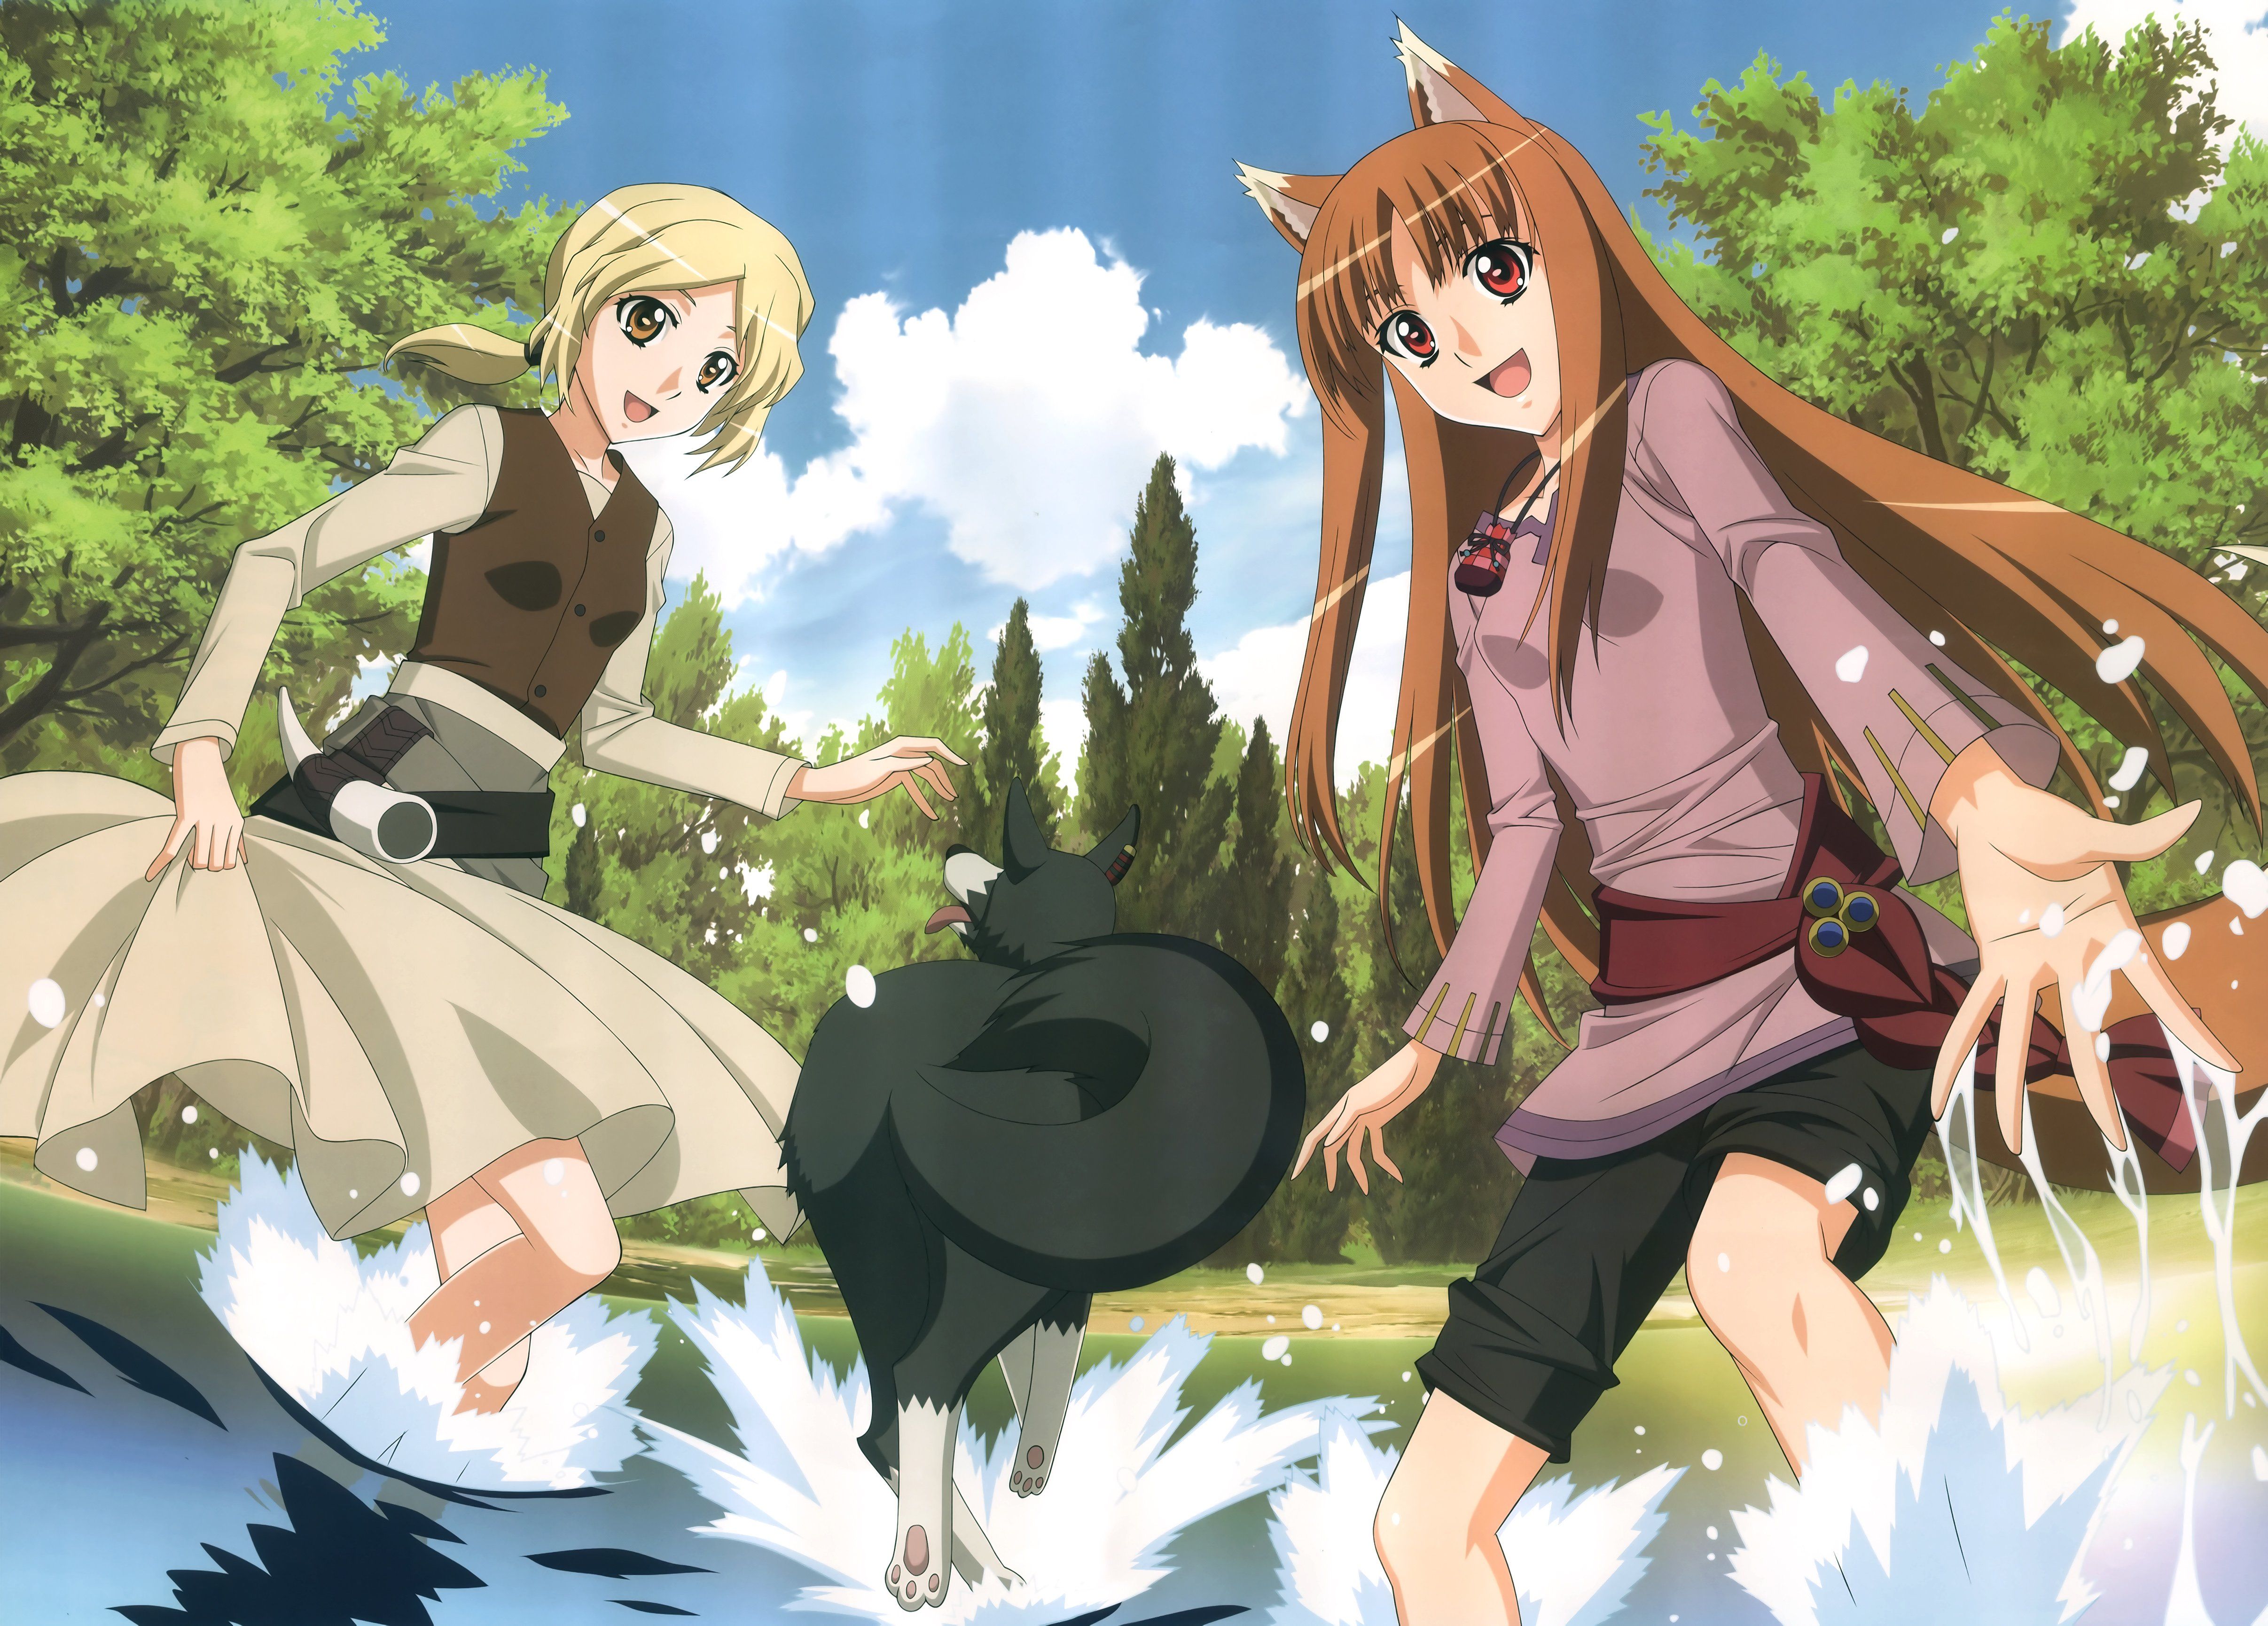 Spice And Wolf wallpaper, Anime, HQ Spice And Wolf pictureK Wallpaper 2019